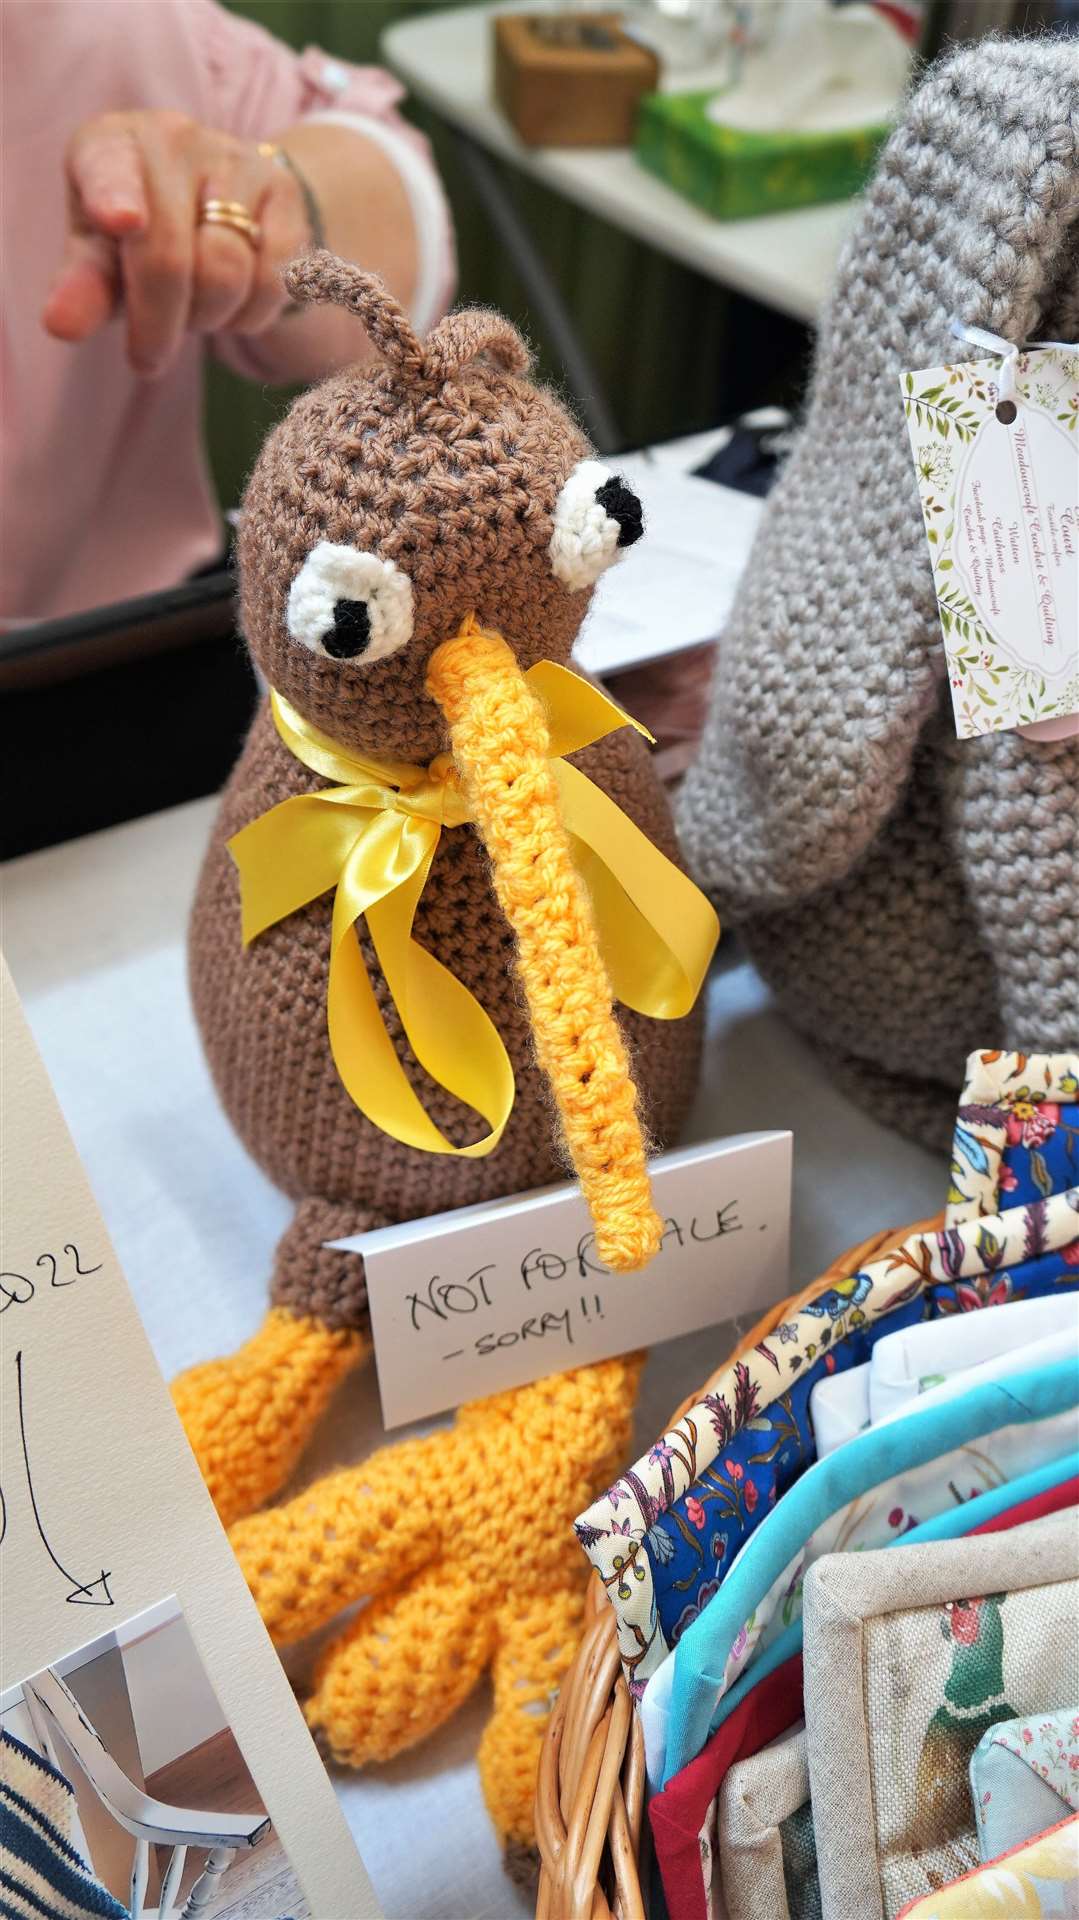 This lovely crocheted kiwi called Kojak by Meadowcroft Crochet and Quilting was unfortunately not for sale.